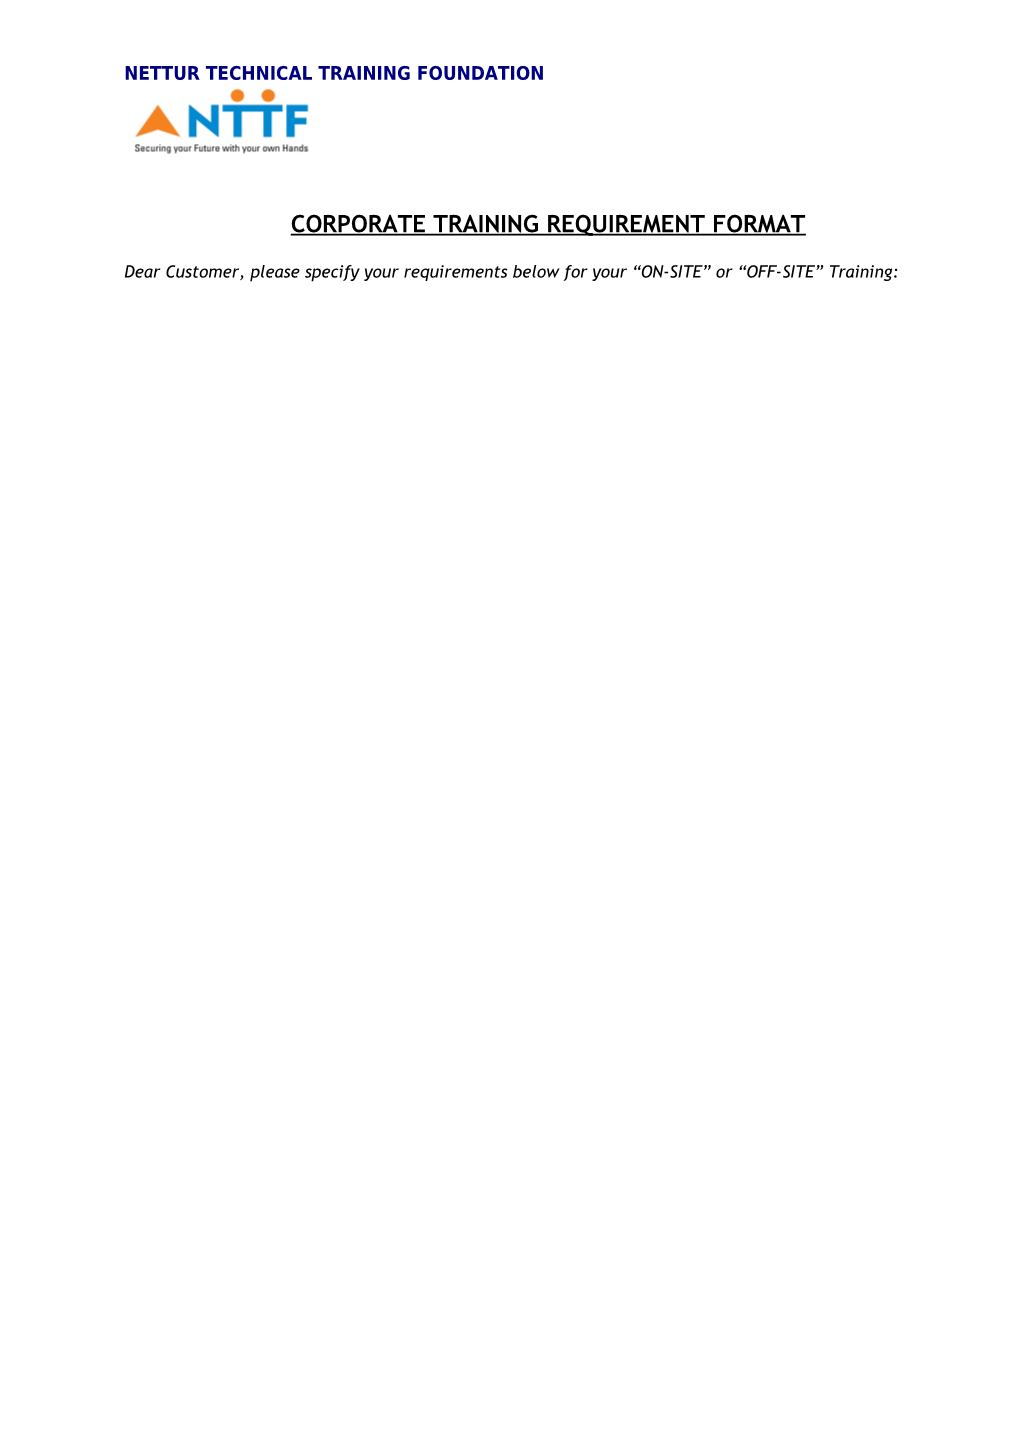 Corporate Training Requirement Format